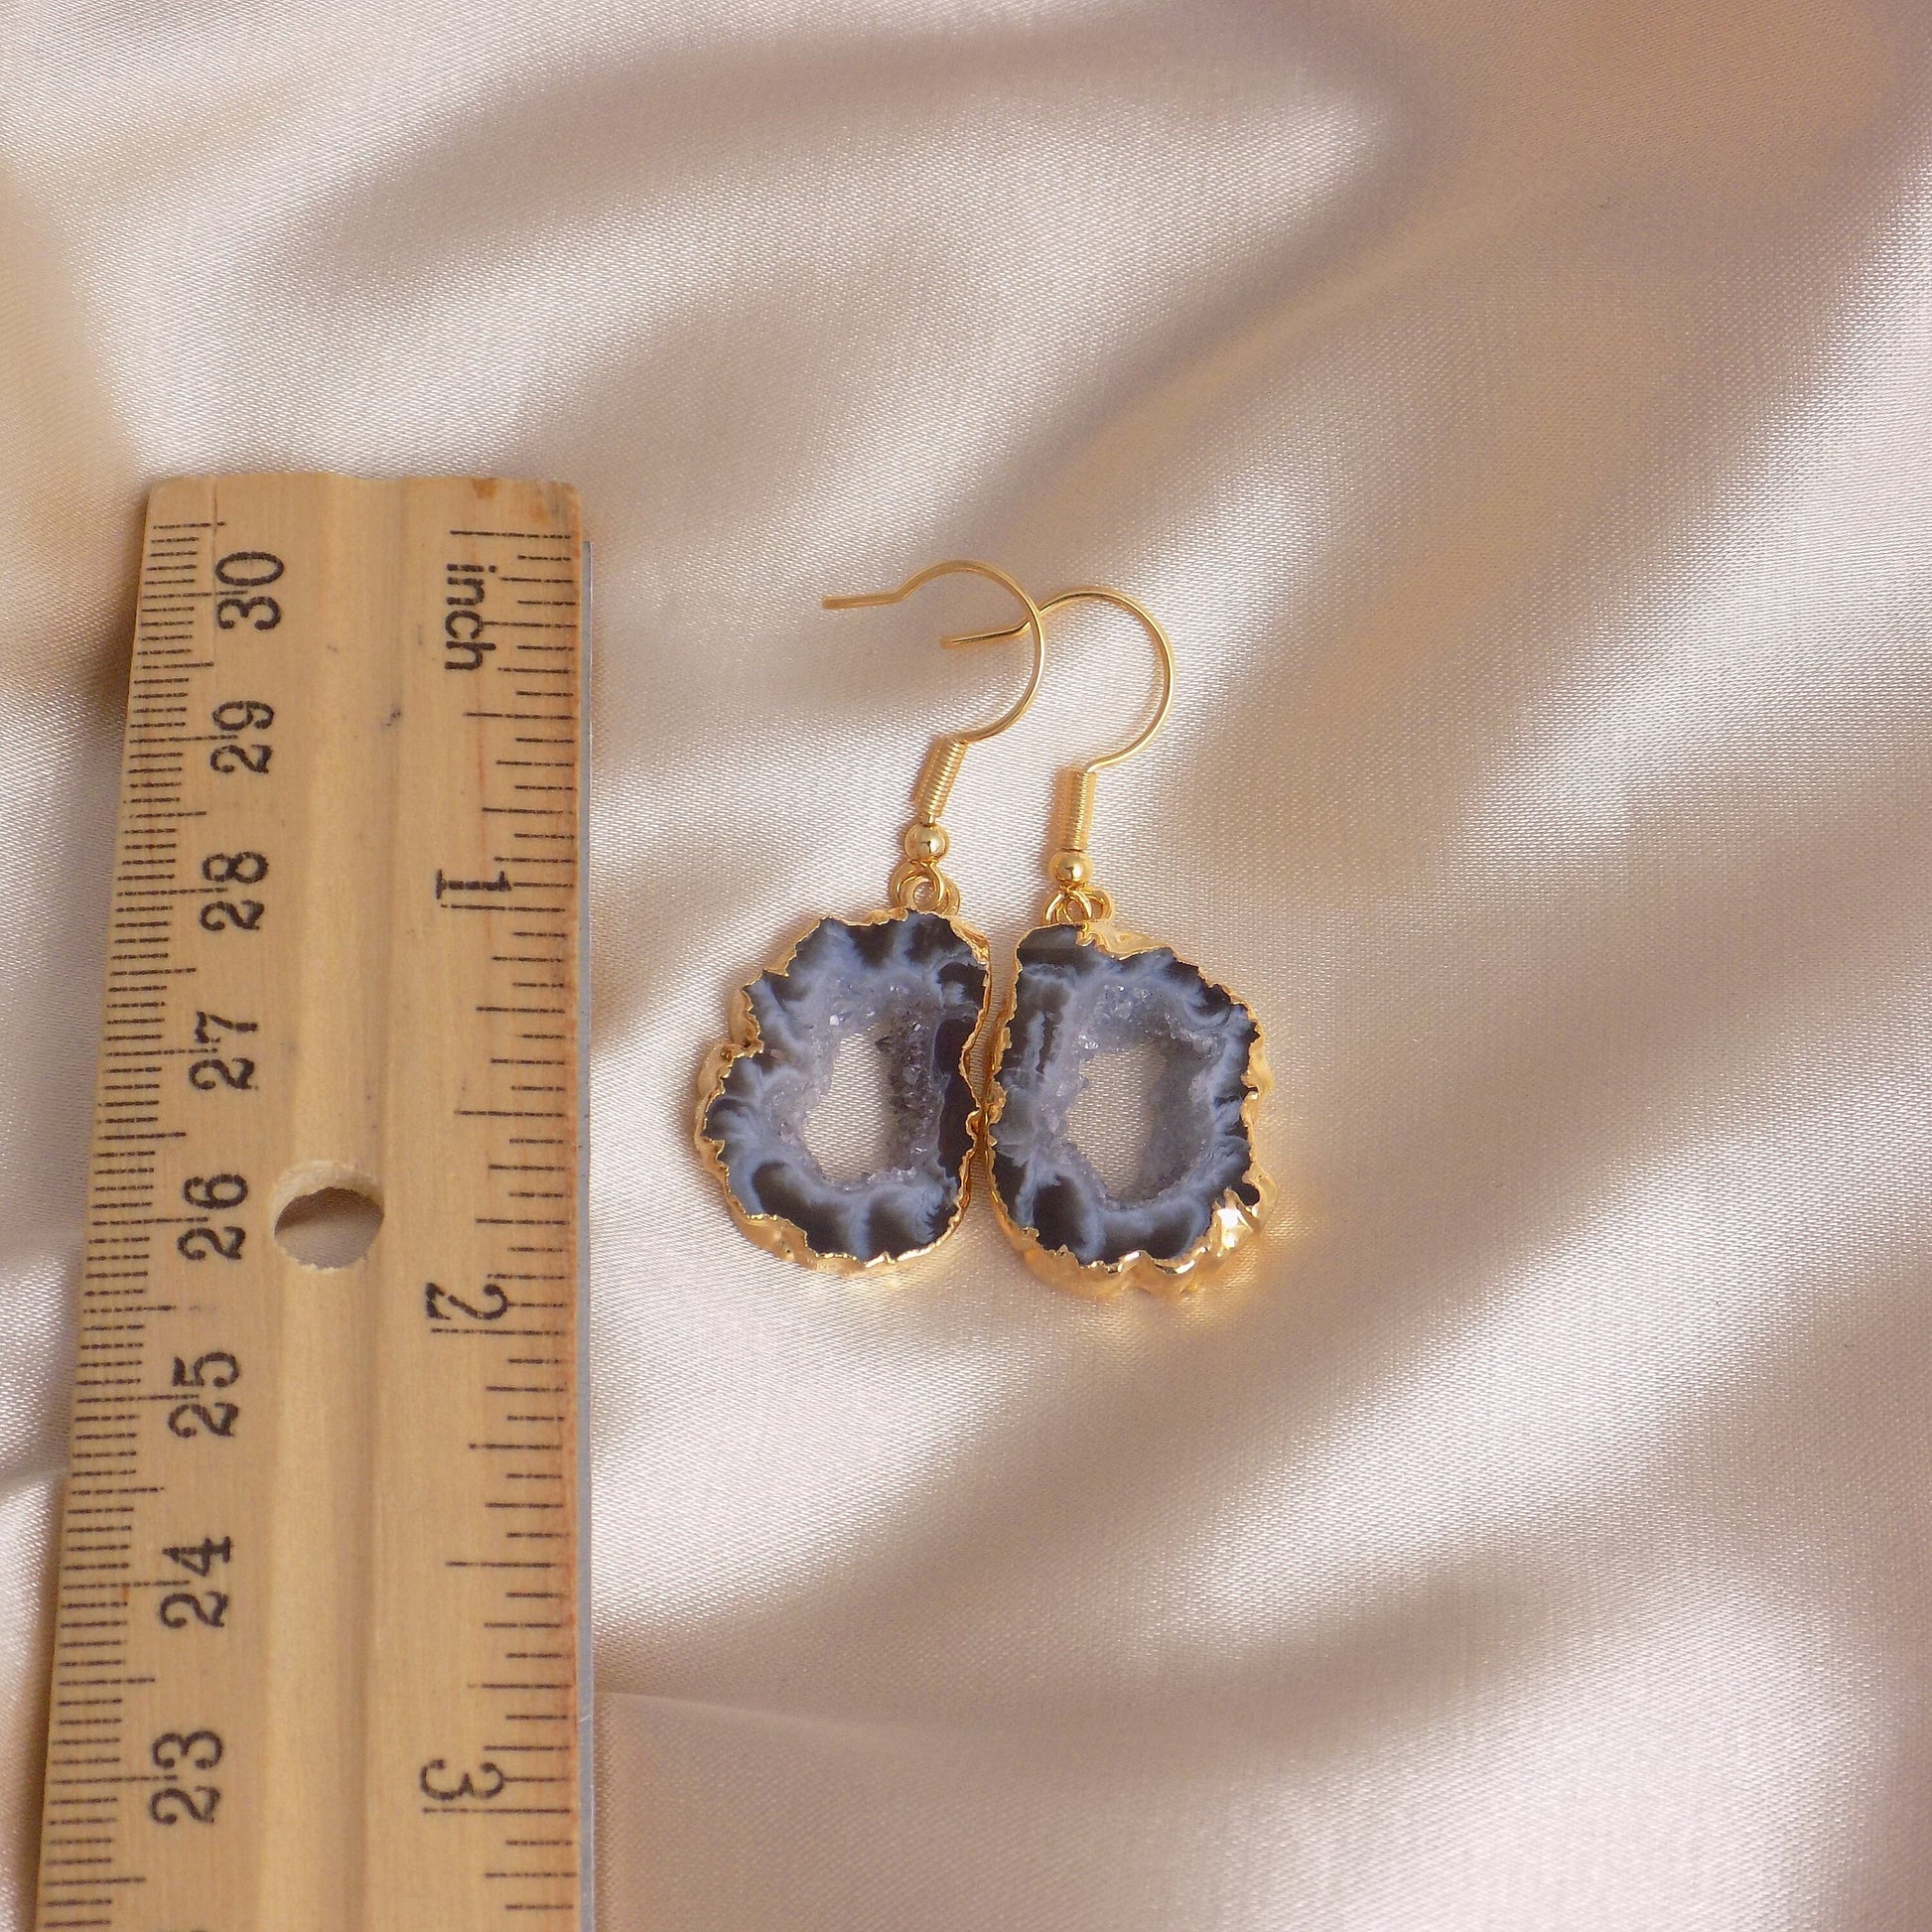 Geode Slice Gemstone Earrings Gold, Natural Stone Jewelry For Women, G15-35